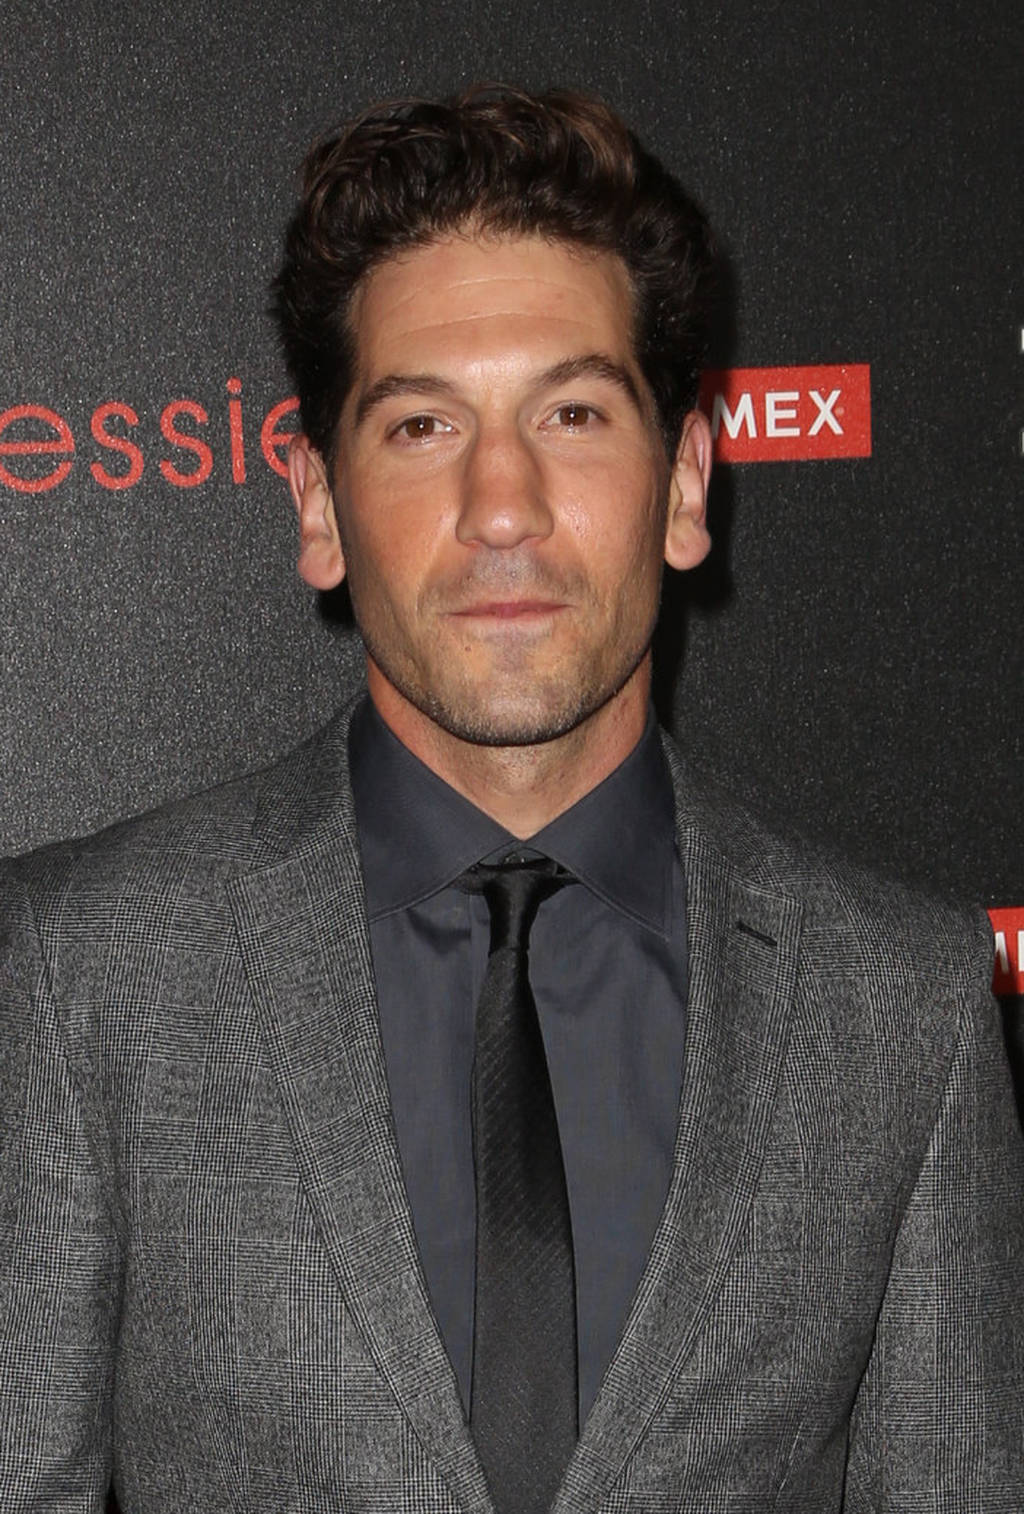 Pictures of Jon Bernthal - Pictures Of Celebrities